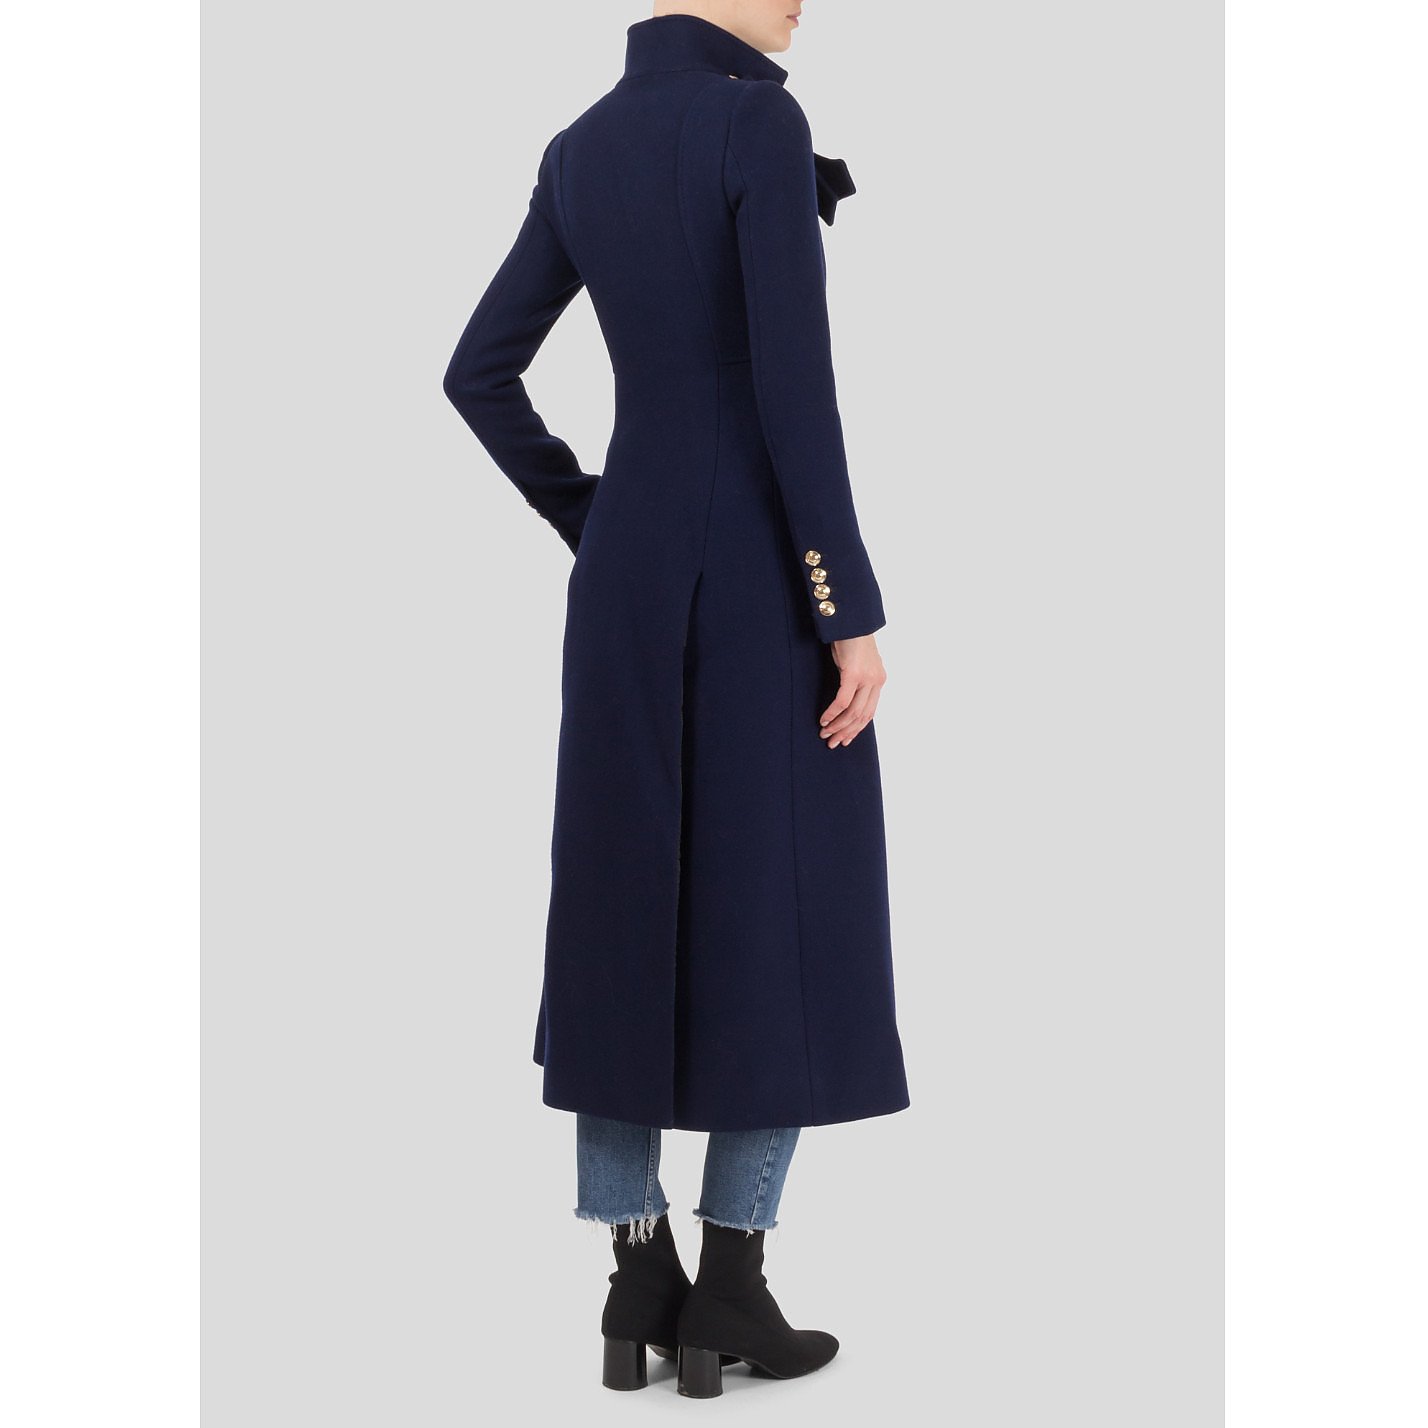 Gucci Tailored Military Coat